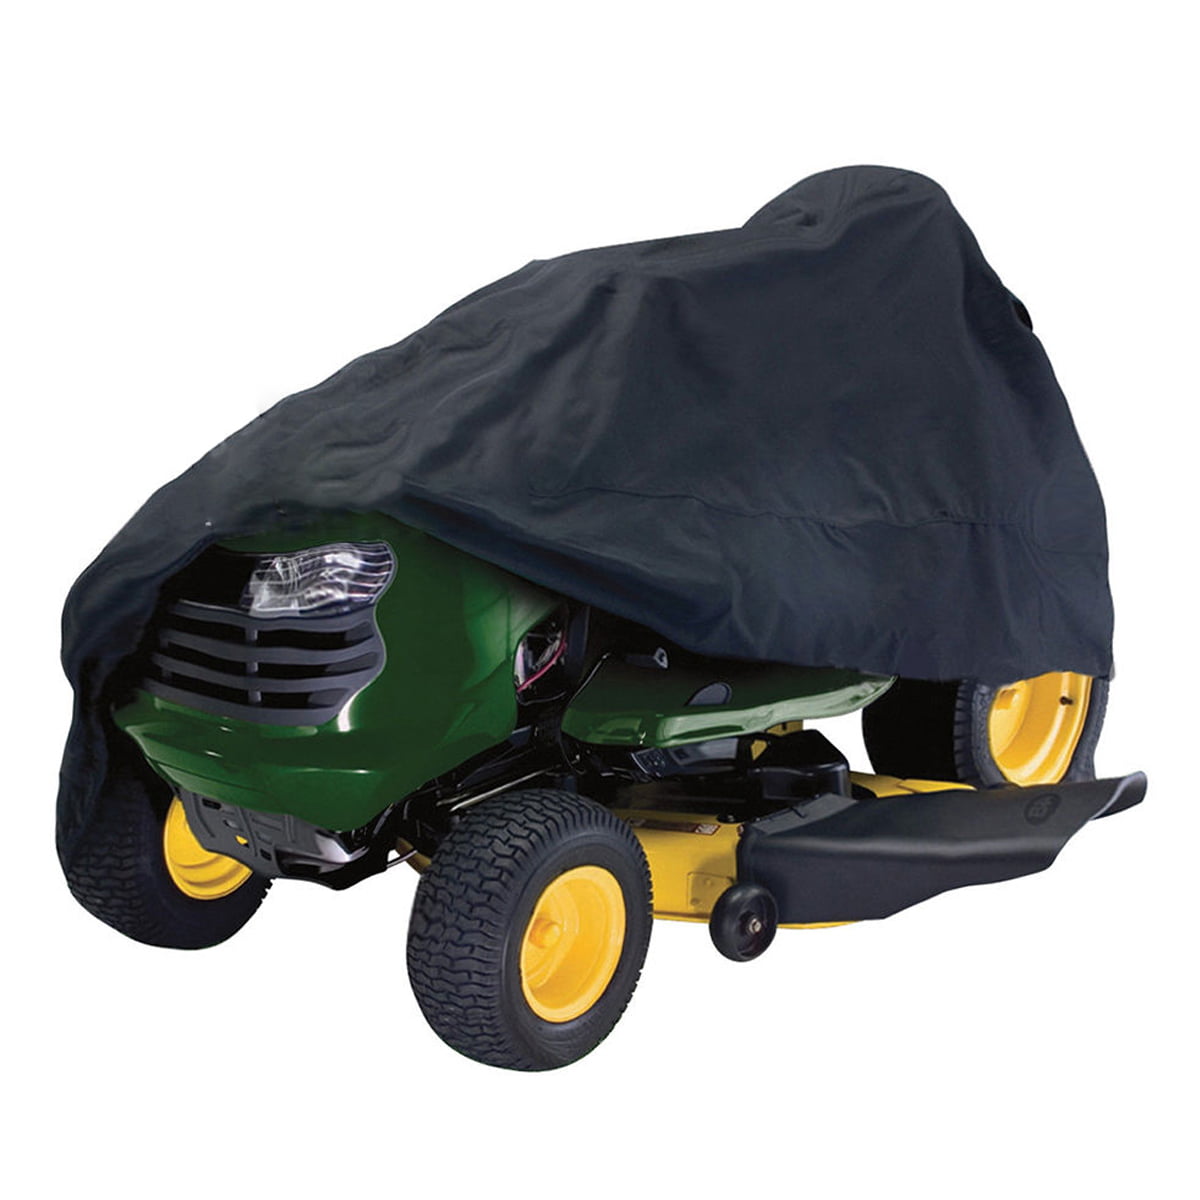 Tractor Cover 55" Lawn Riding Mower Tractor Cover Garden Yard UV  Waterproof 